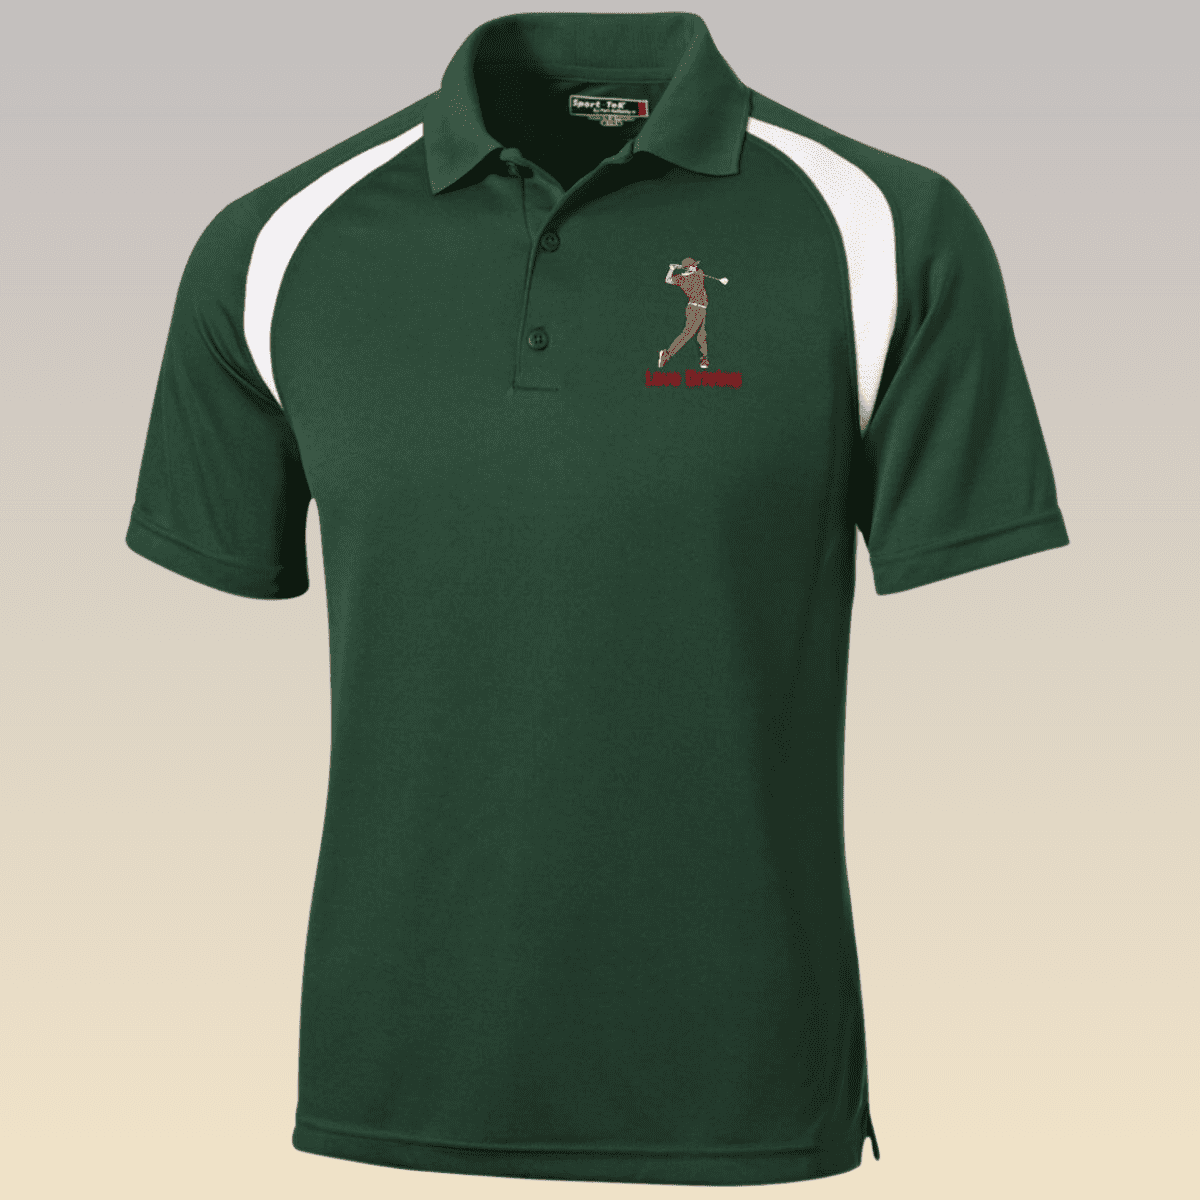 Men's Green and White Golf Love Driving Moisture-Wicking Polo Shirt